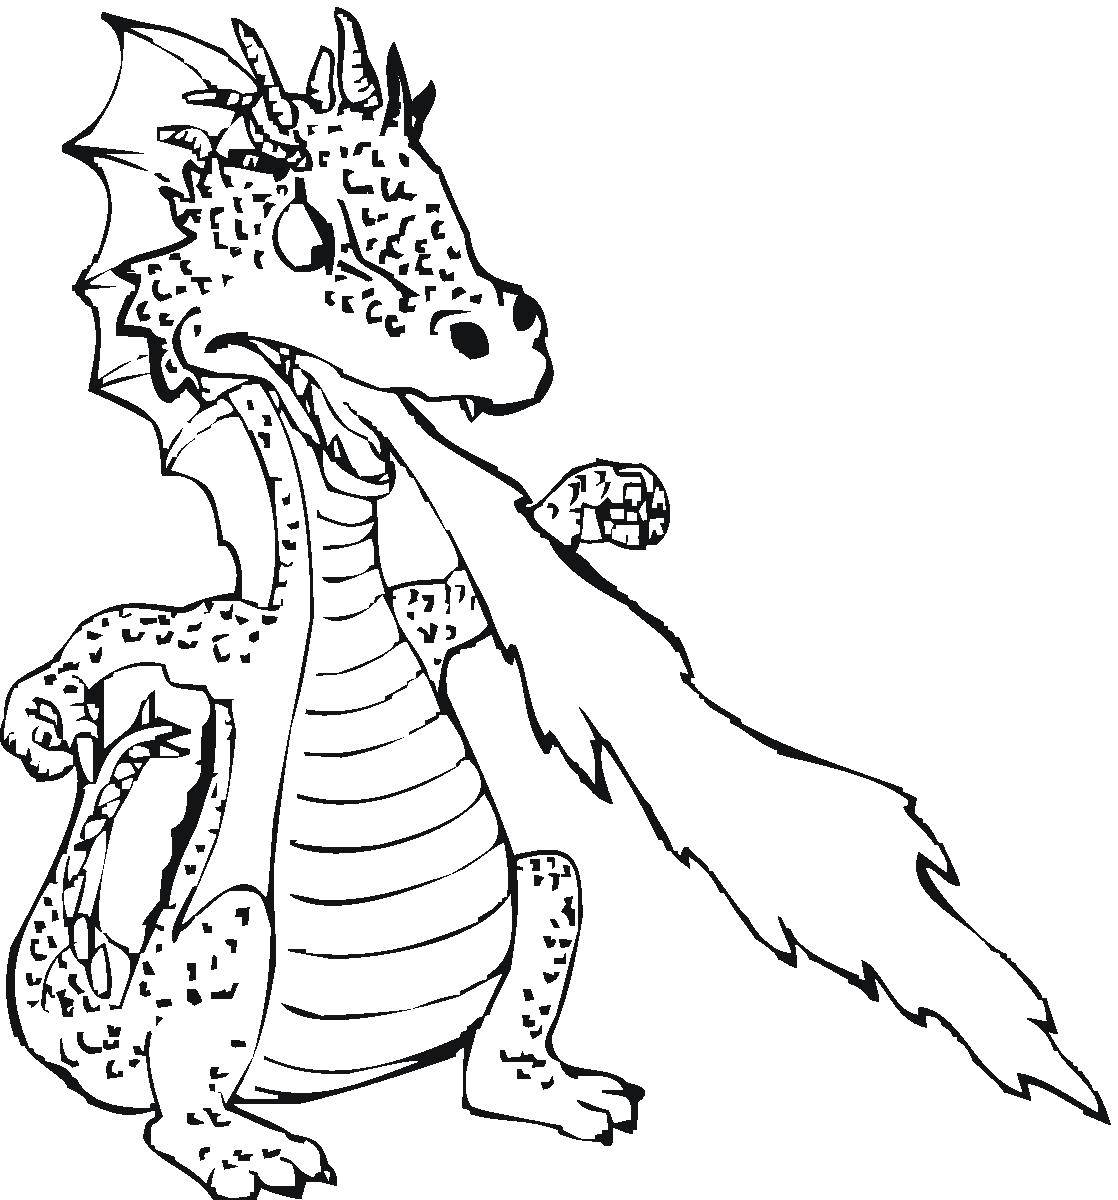 Coloring A fire-breathing dragon. Category Dragons. Tags:  dragons, fire-breathing.